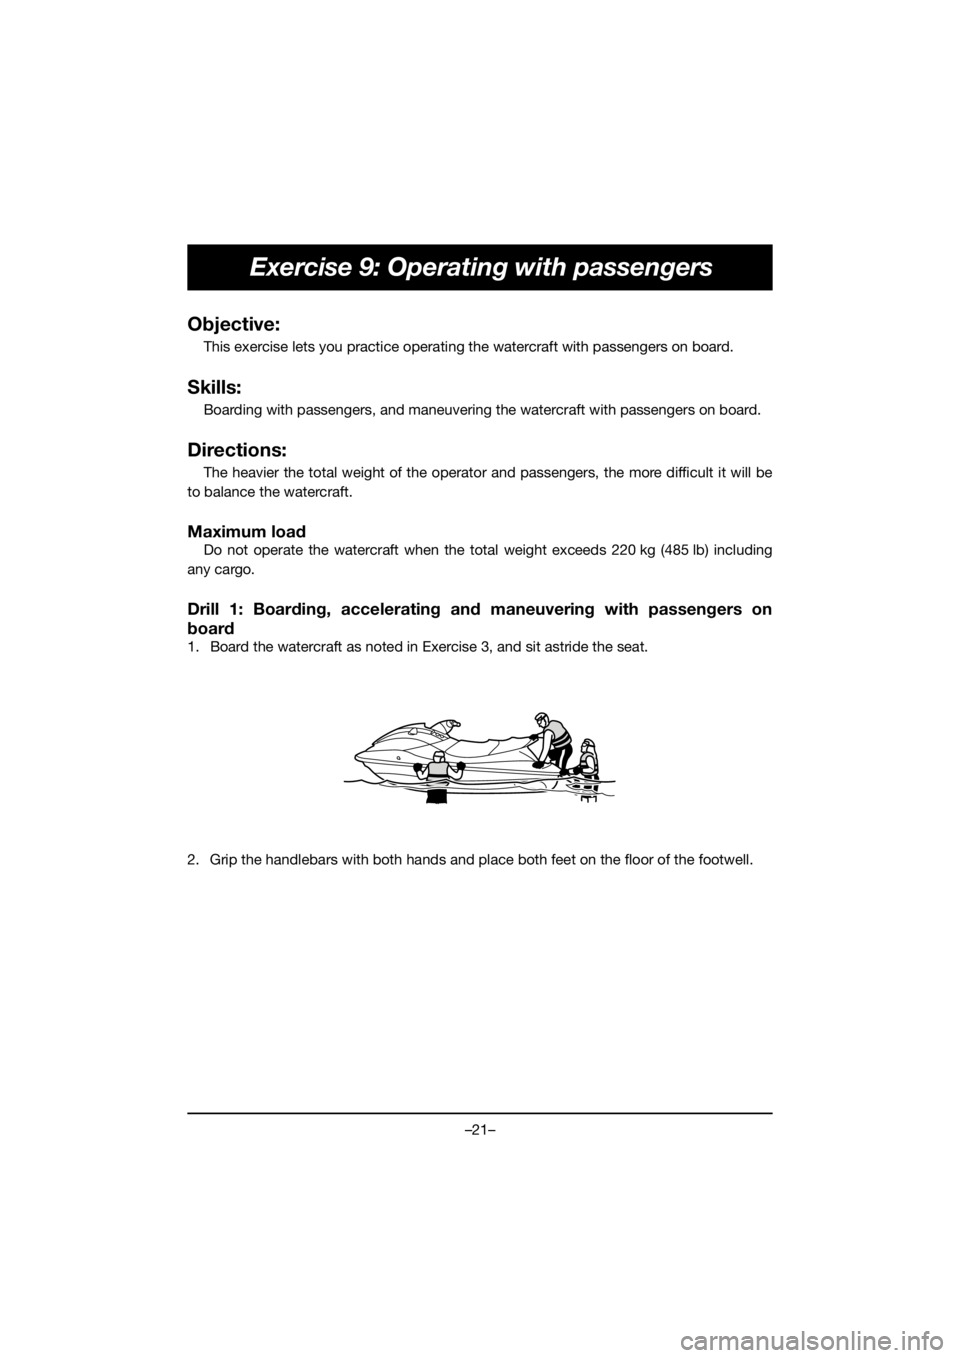 YAMAHA EX SPORT 2020  Owners Manual –21–
Exercise 9: Operating with passengers
Objective:
This exercise lets you practice operating the watercraft with passengers on board.
Skills:
Boarding with passengers, and maneuvering the water